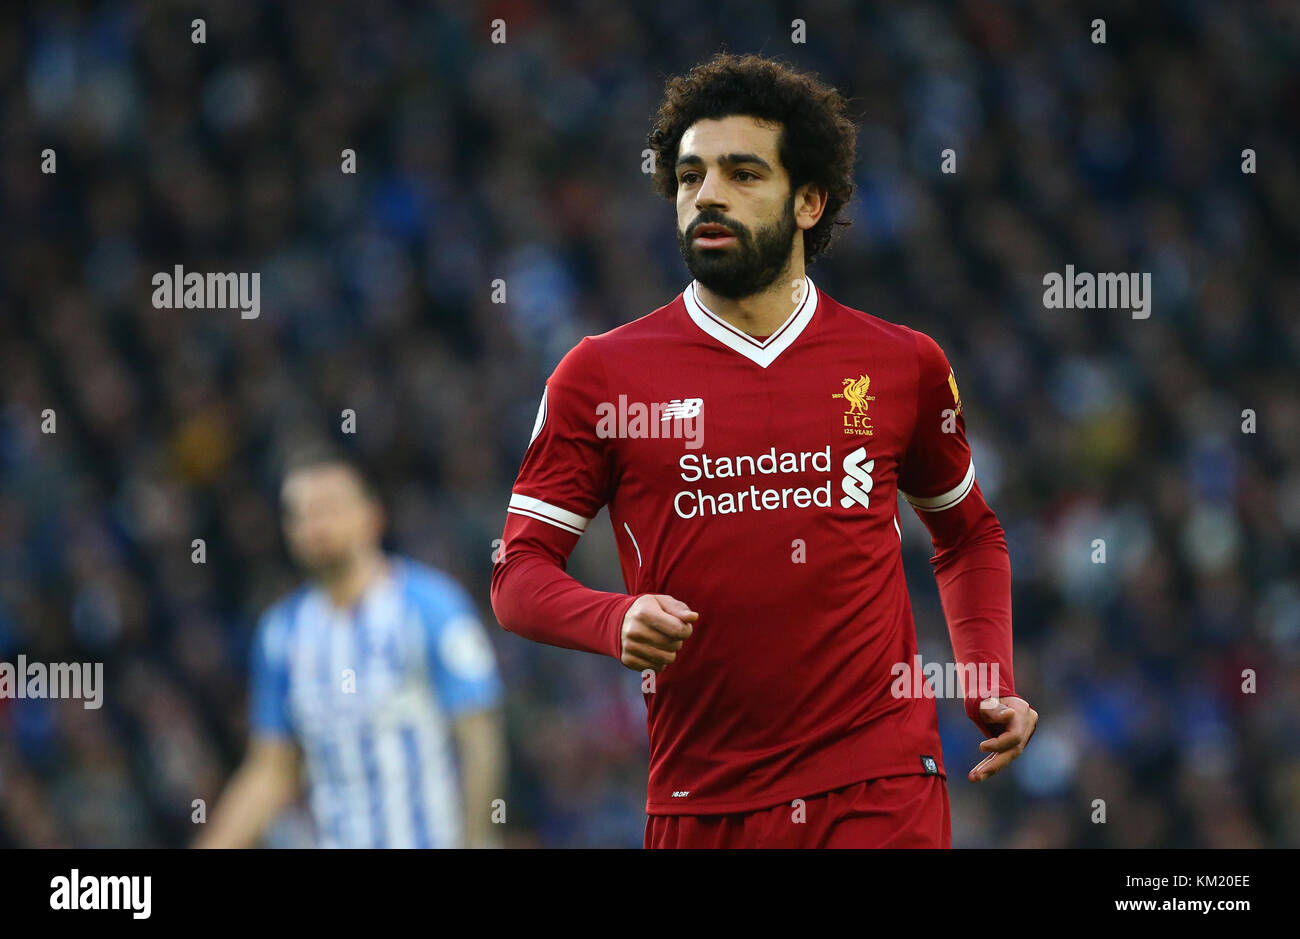 Mohamed Salah of Liverpool during the Premier League match between Brighton and Hove Albion and Liverpool at the American Express Community Stadium in Brighton and Hove. 02 Dec 2017 *** EDITORIAL USE ONLY *** FA Premier League and Football League images are subject to DataCo Licence see www.football-dataco.com Stock Photo